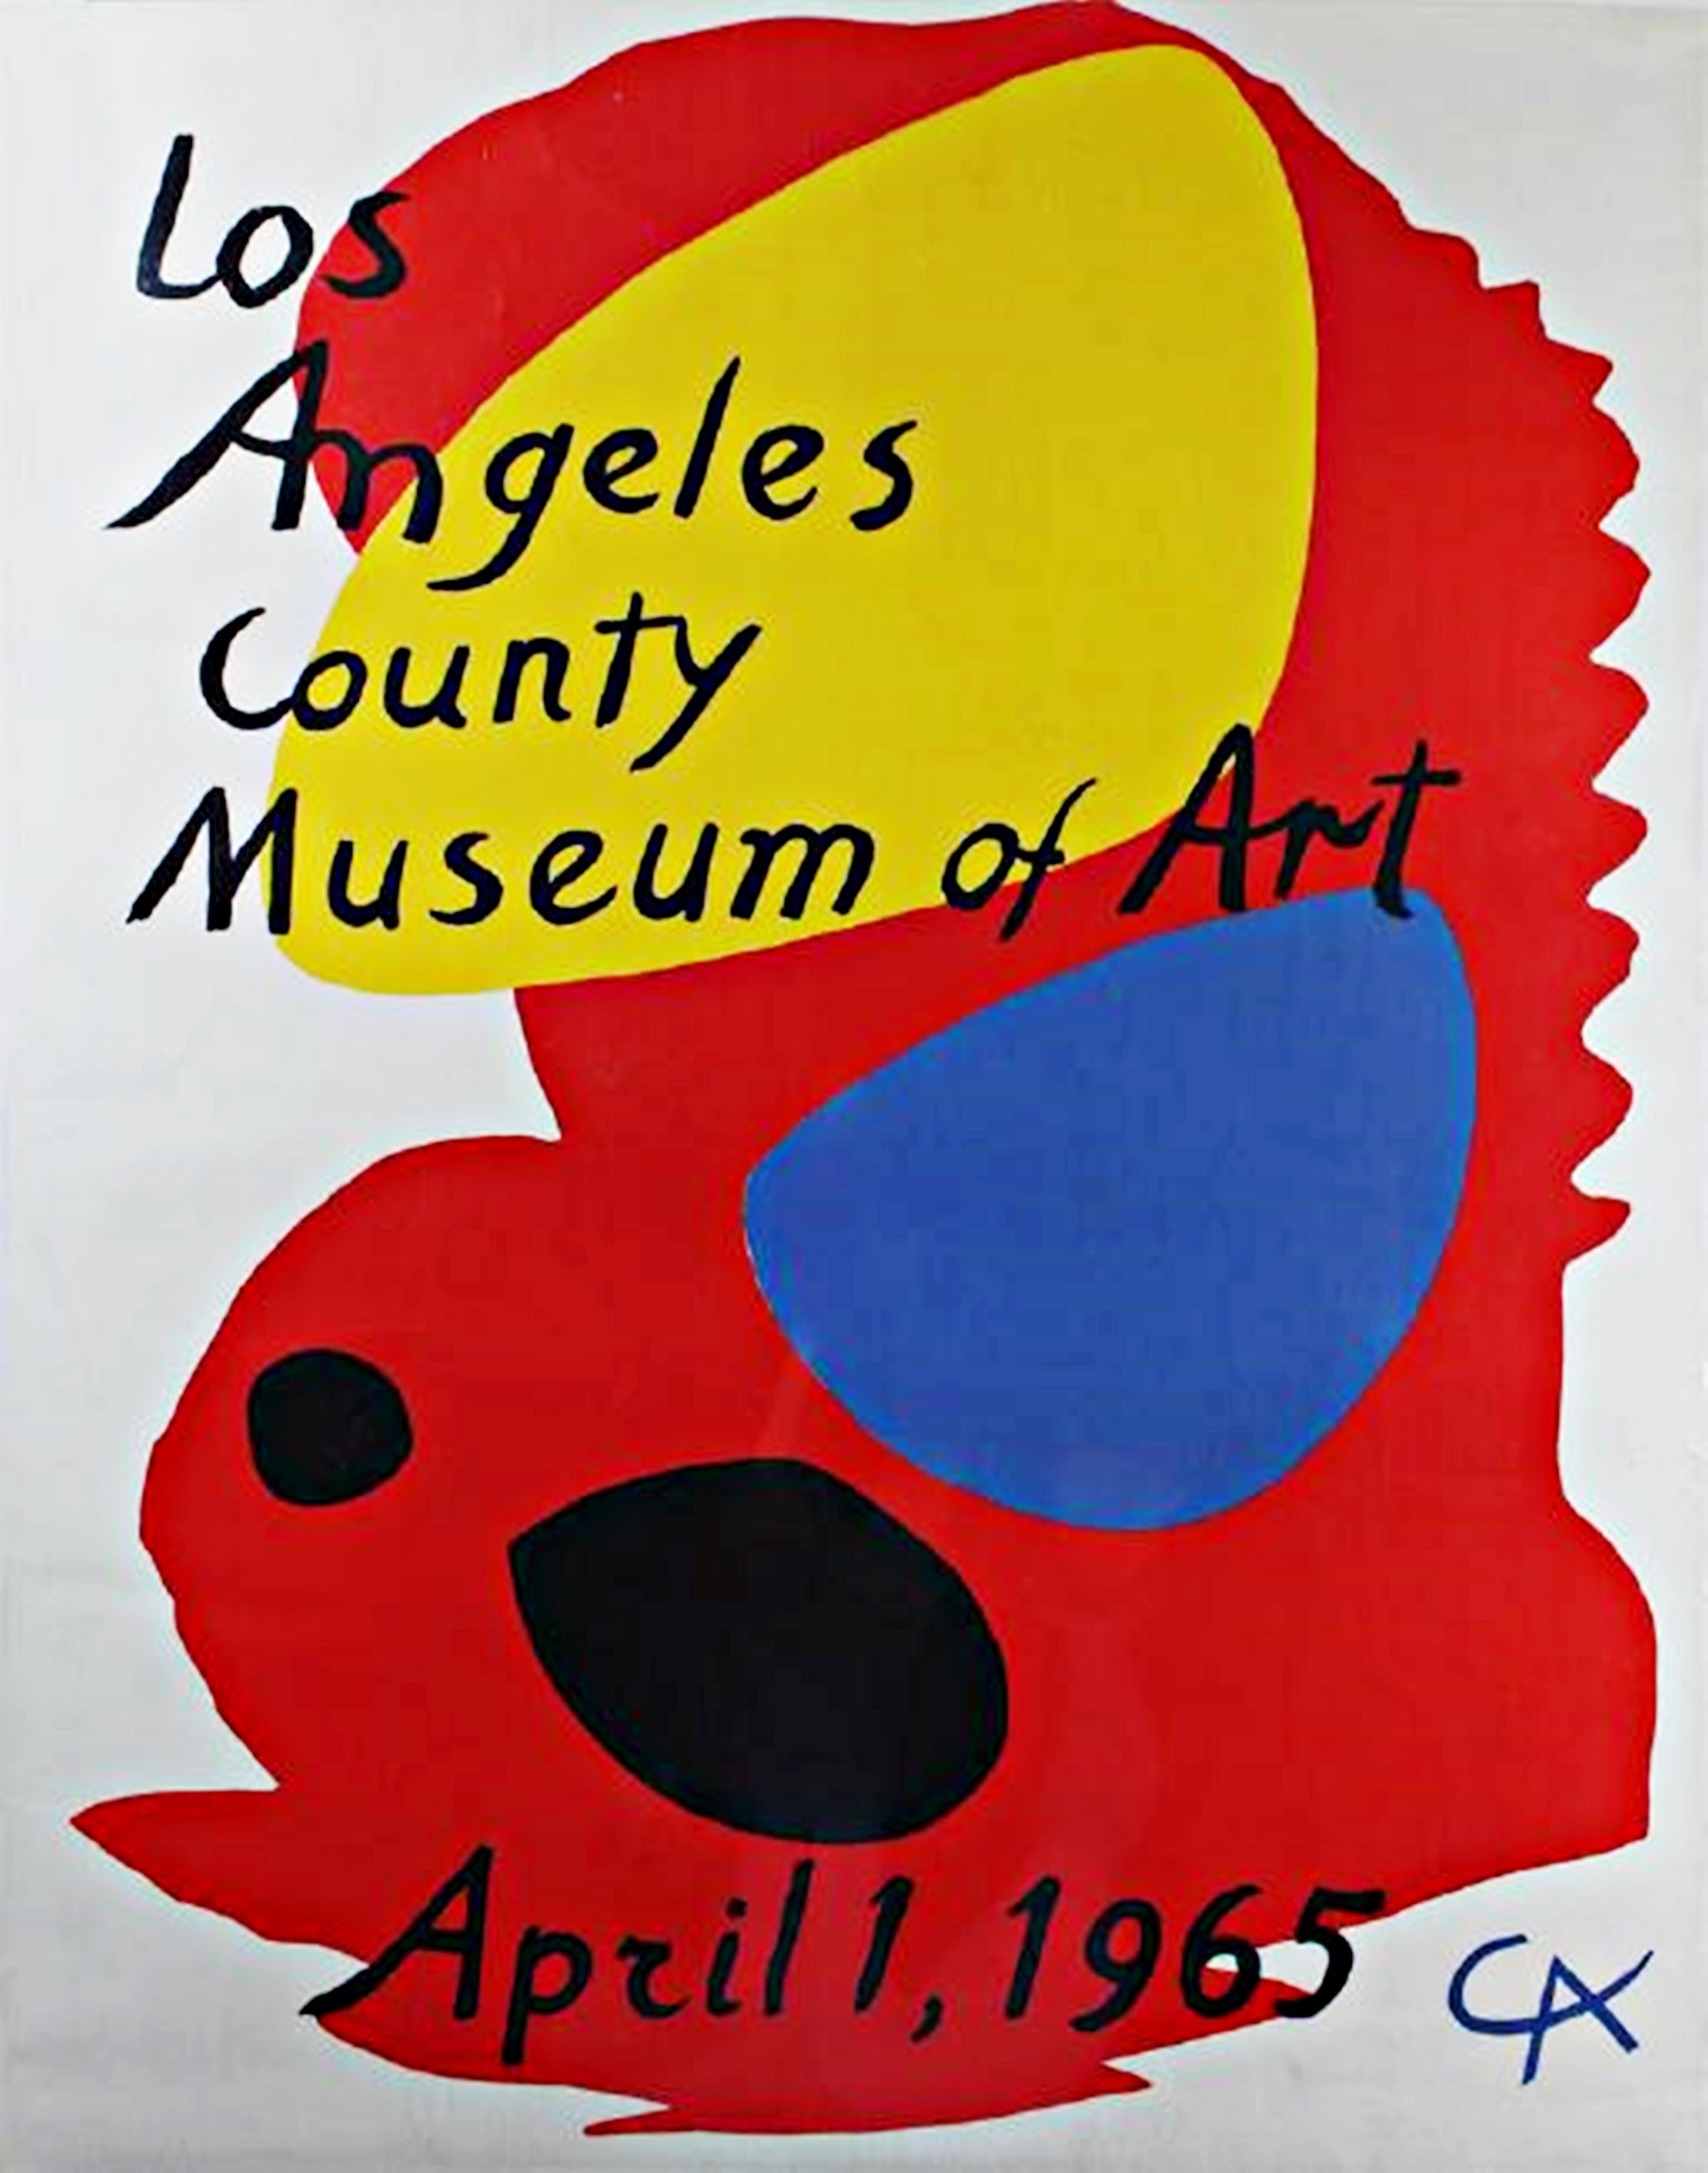 Alexander Calder Print - The original limited edition 1965 Los Angeles County Museum of Art LACMA poster 